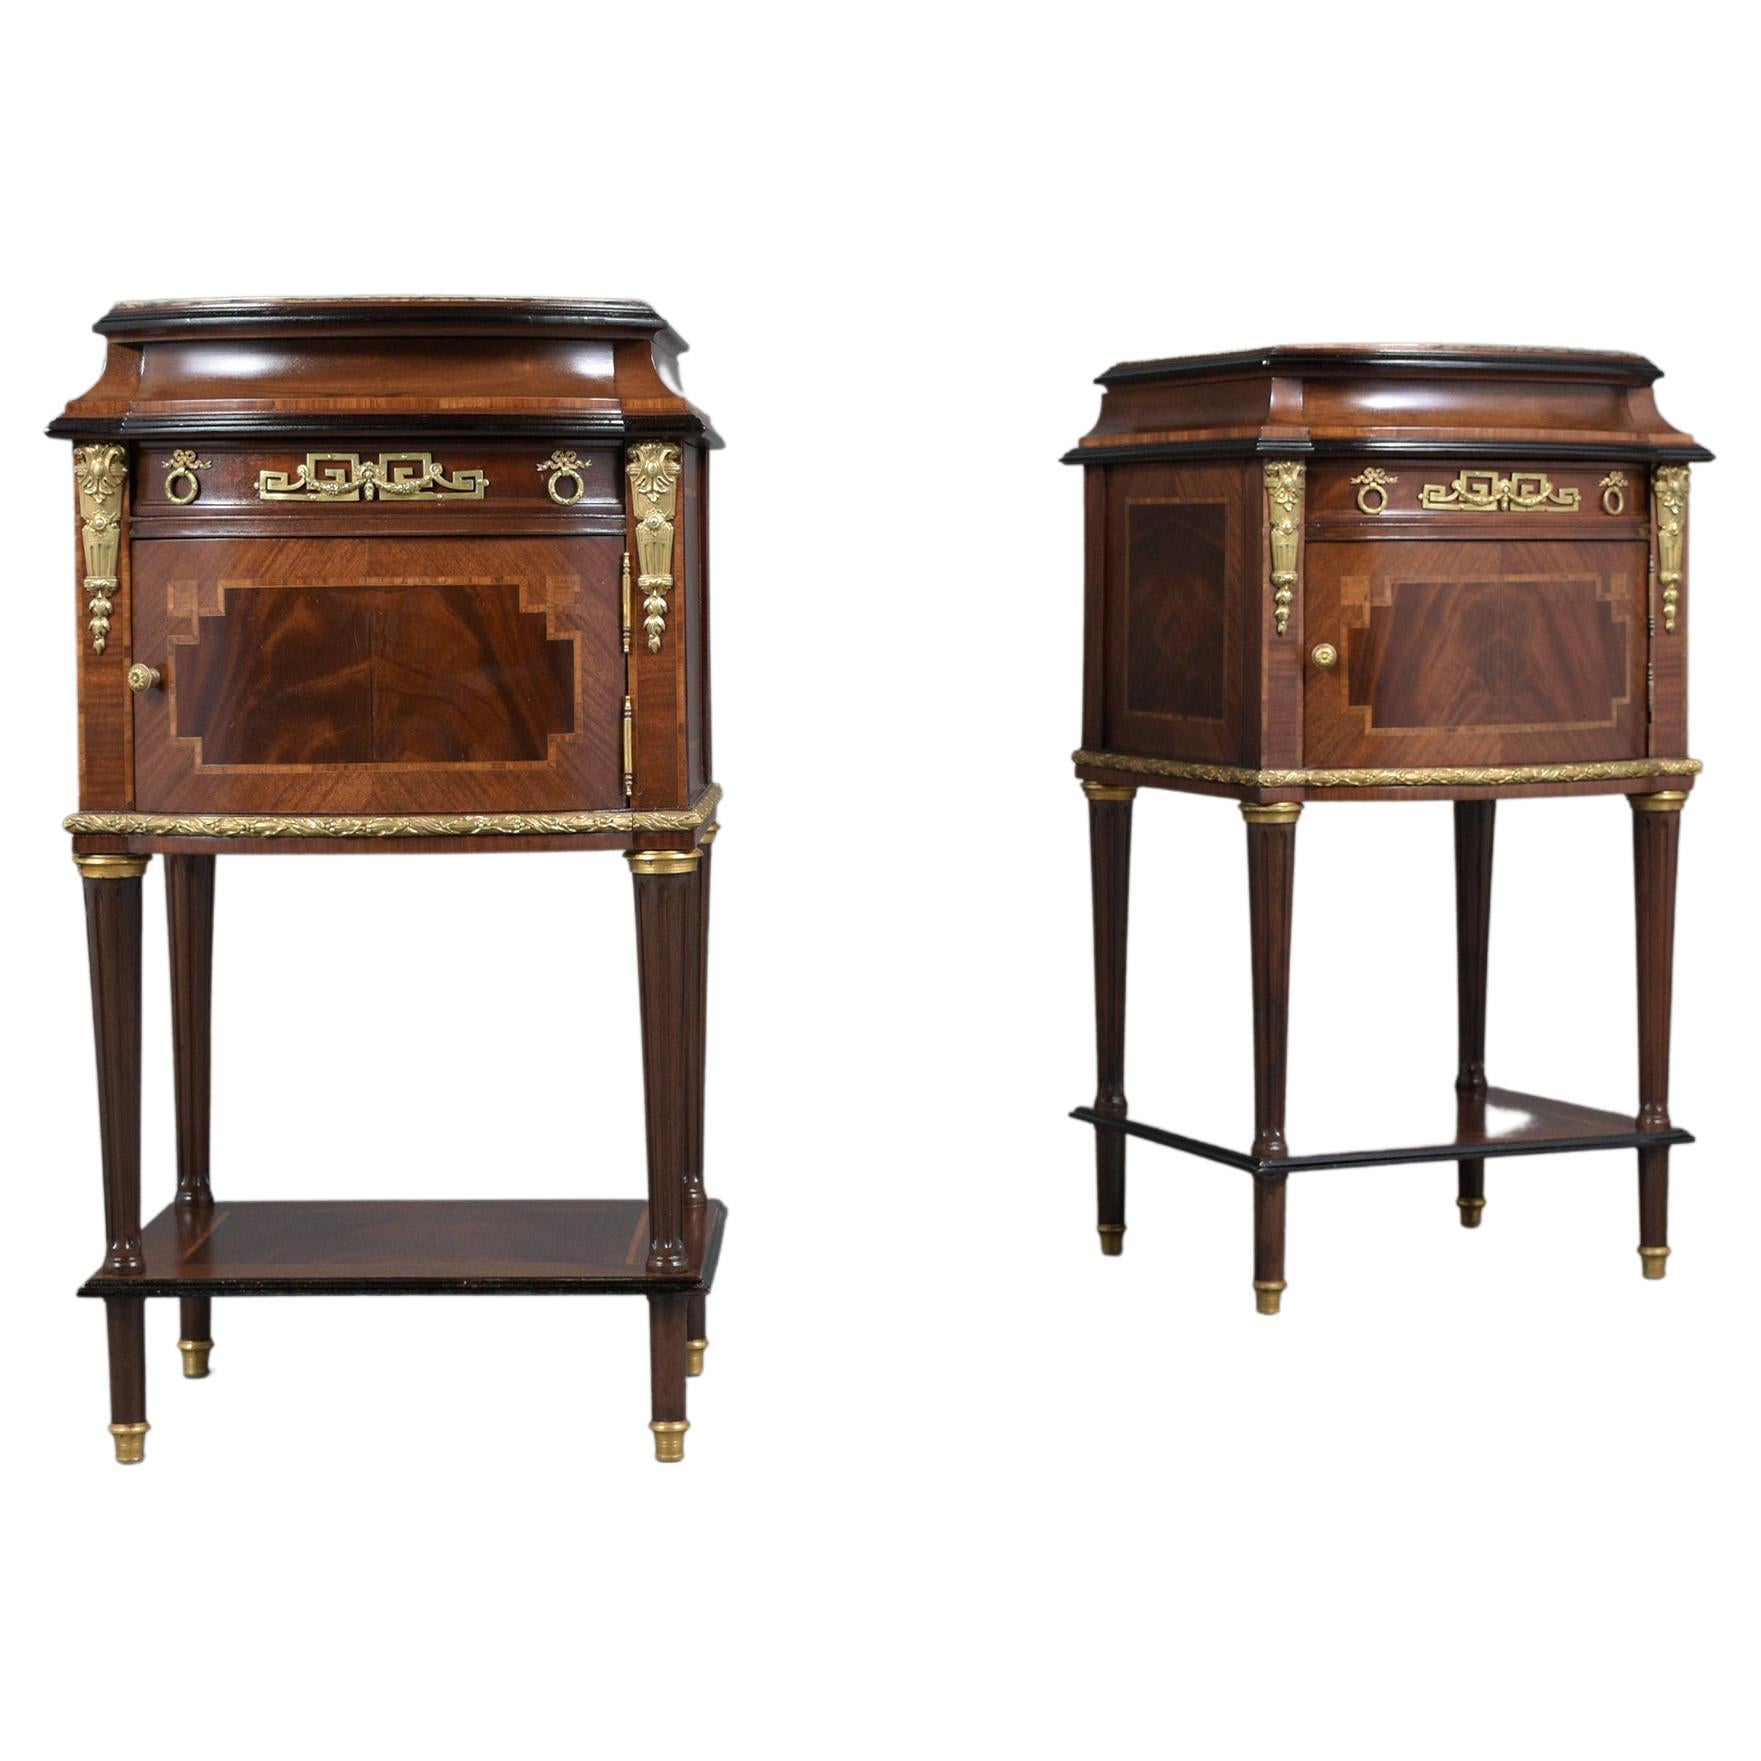 An extraordinary pair of antique french Lois XVI style nightstands beautifully crafted out of mahogany wood & marble combination in great condition professionally restored by our craftsmen team. This fantastic set of side tables features deep rich